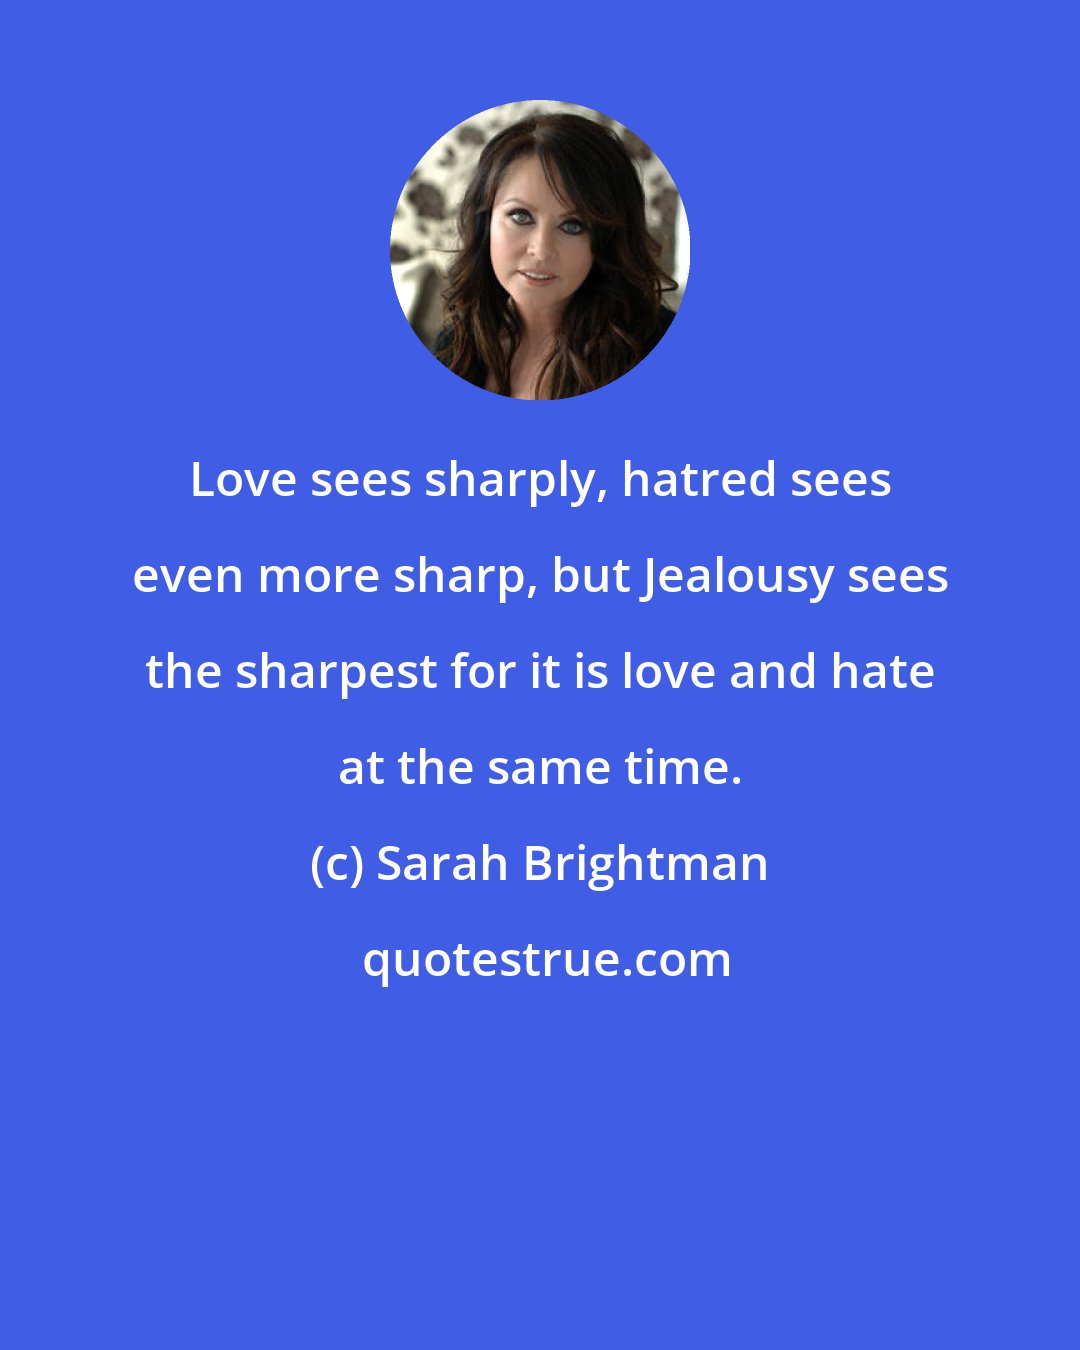 Sarah Brightman: Love sees sharply, hatred sees even more sharp, but Jealousy sees the sharpest for it is love and hate at the same time.